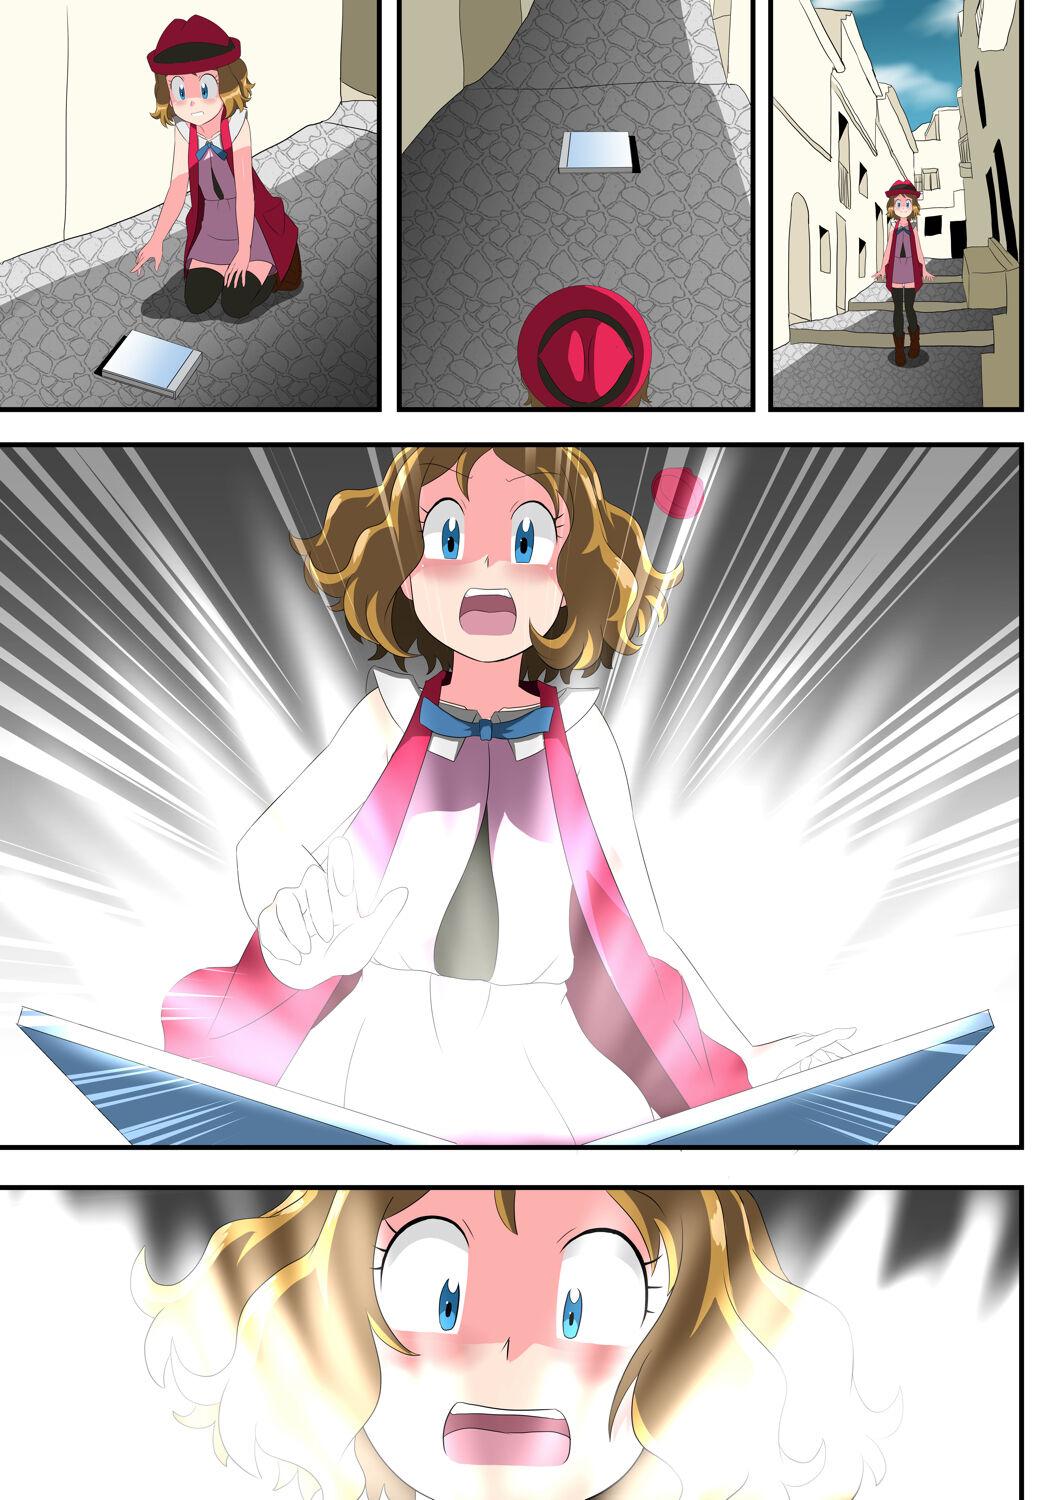 Free Fucking shinenkan モンスターと思われて捕獲されちゃった！They thought I was a pokemon and captured me ! - Pokemon | pocket monsters Sixtynine - Page 11